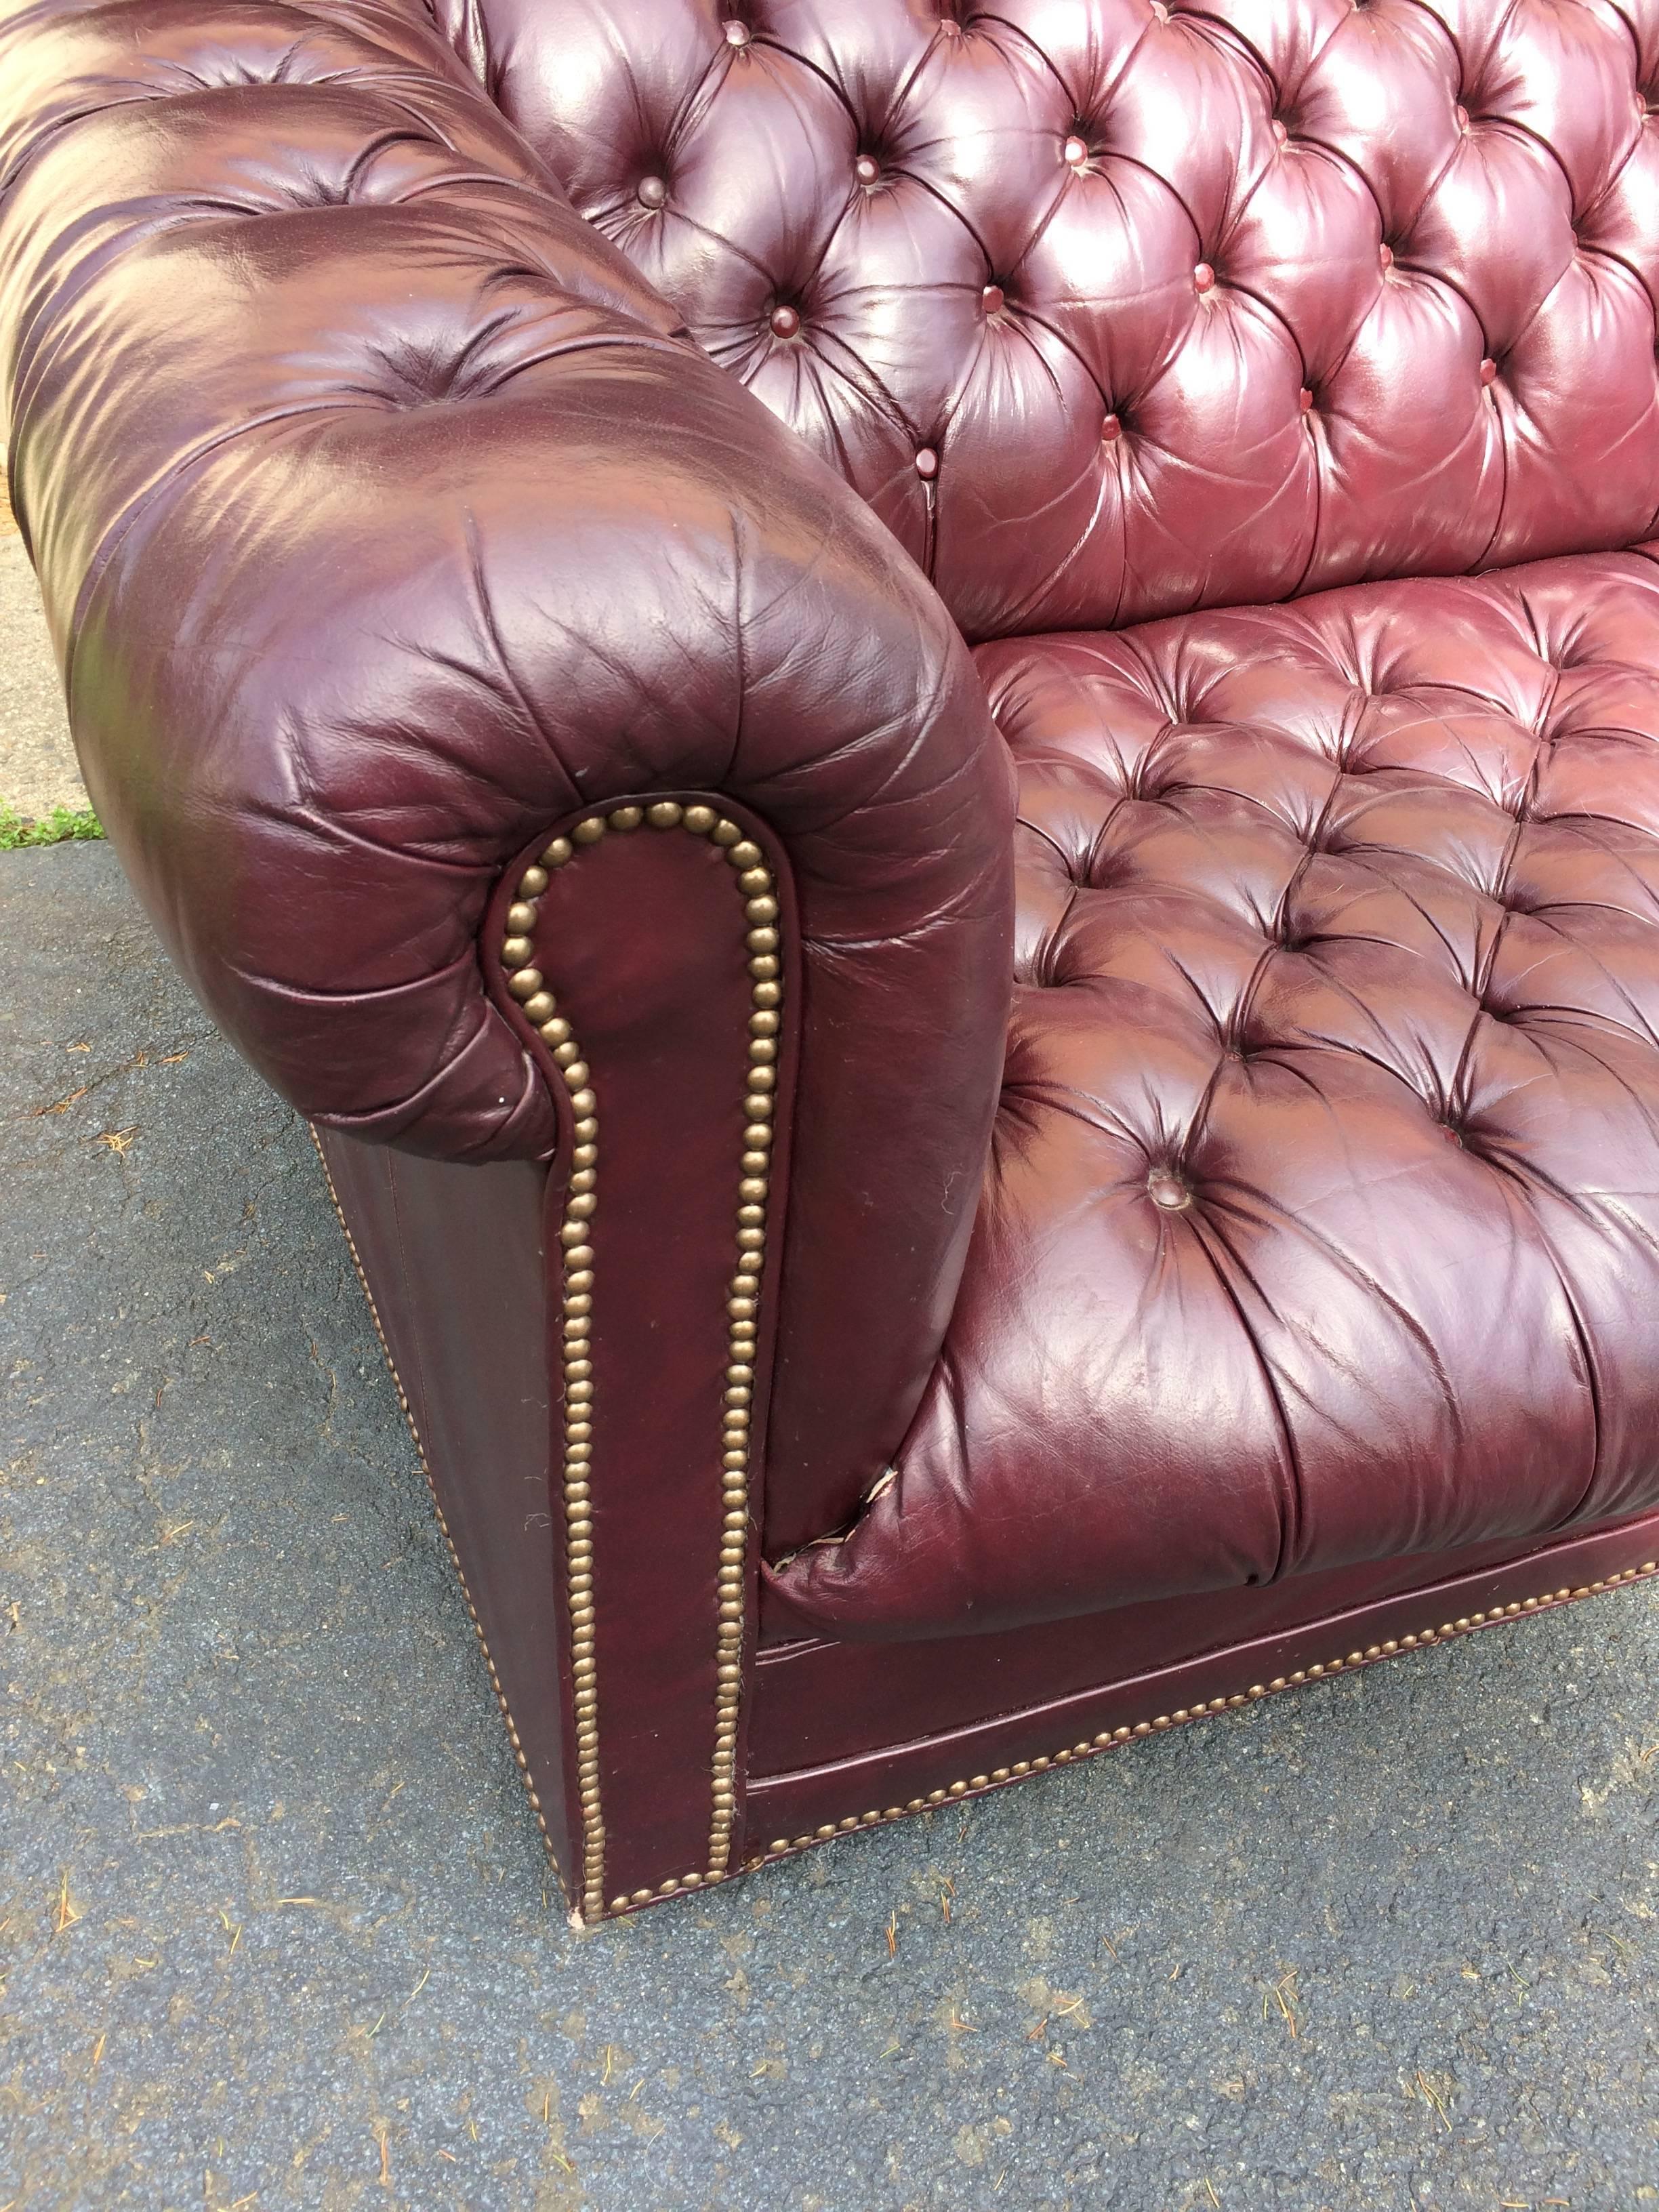 Wonderful Classic Chesterfield sofa in a dark purple eggplant color finished with brass nailheads. Some age appropriate wear, such as a bit of loose leather at the front corners and one or two missing nailheads.  Seat depth 27